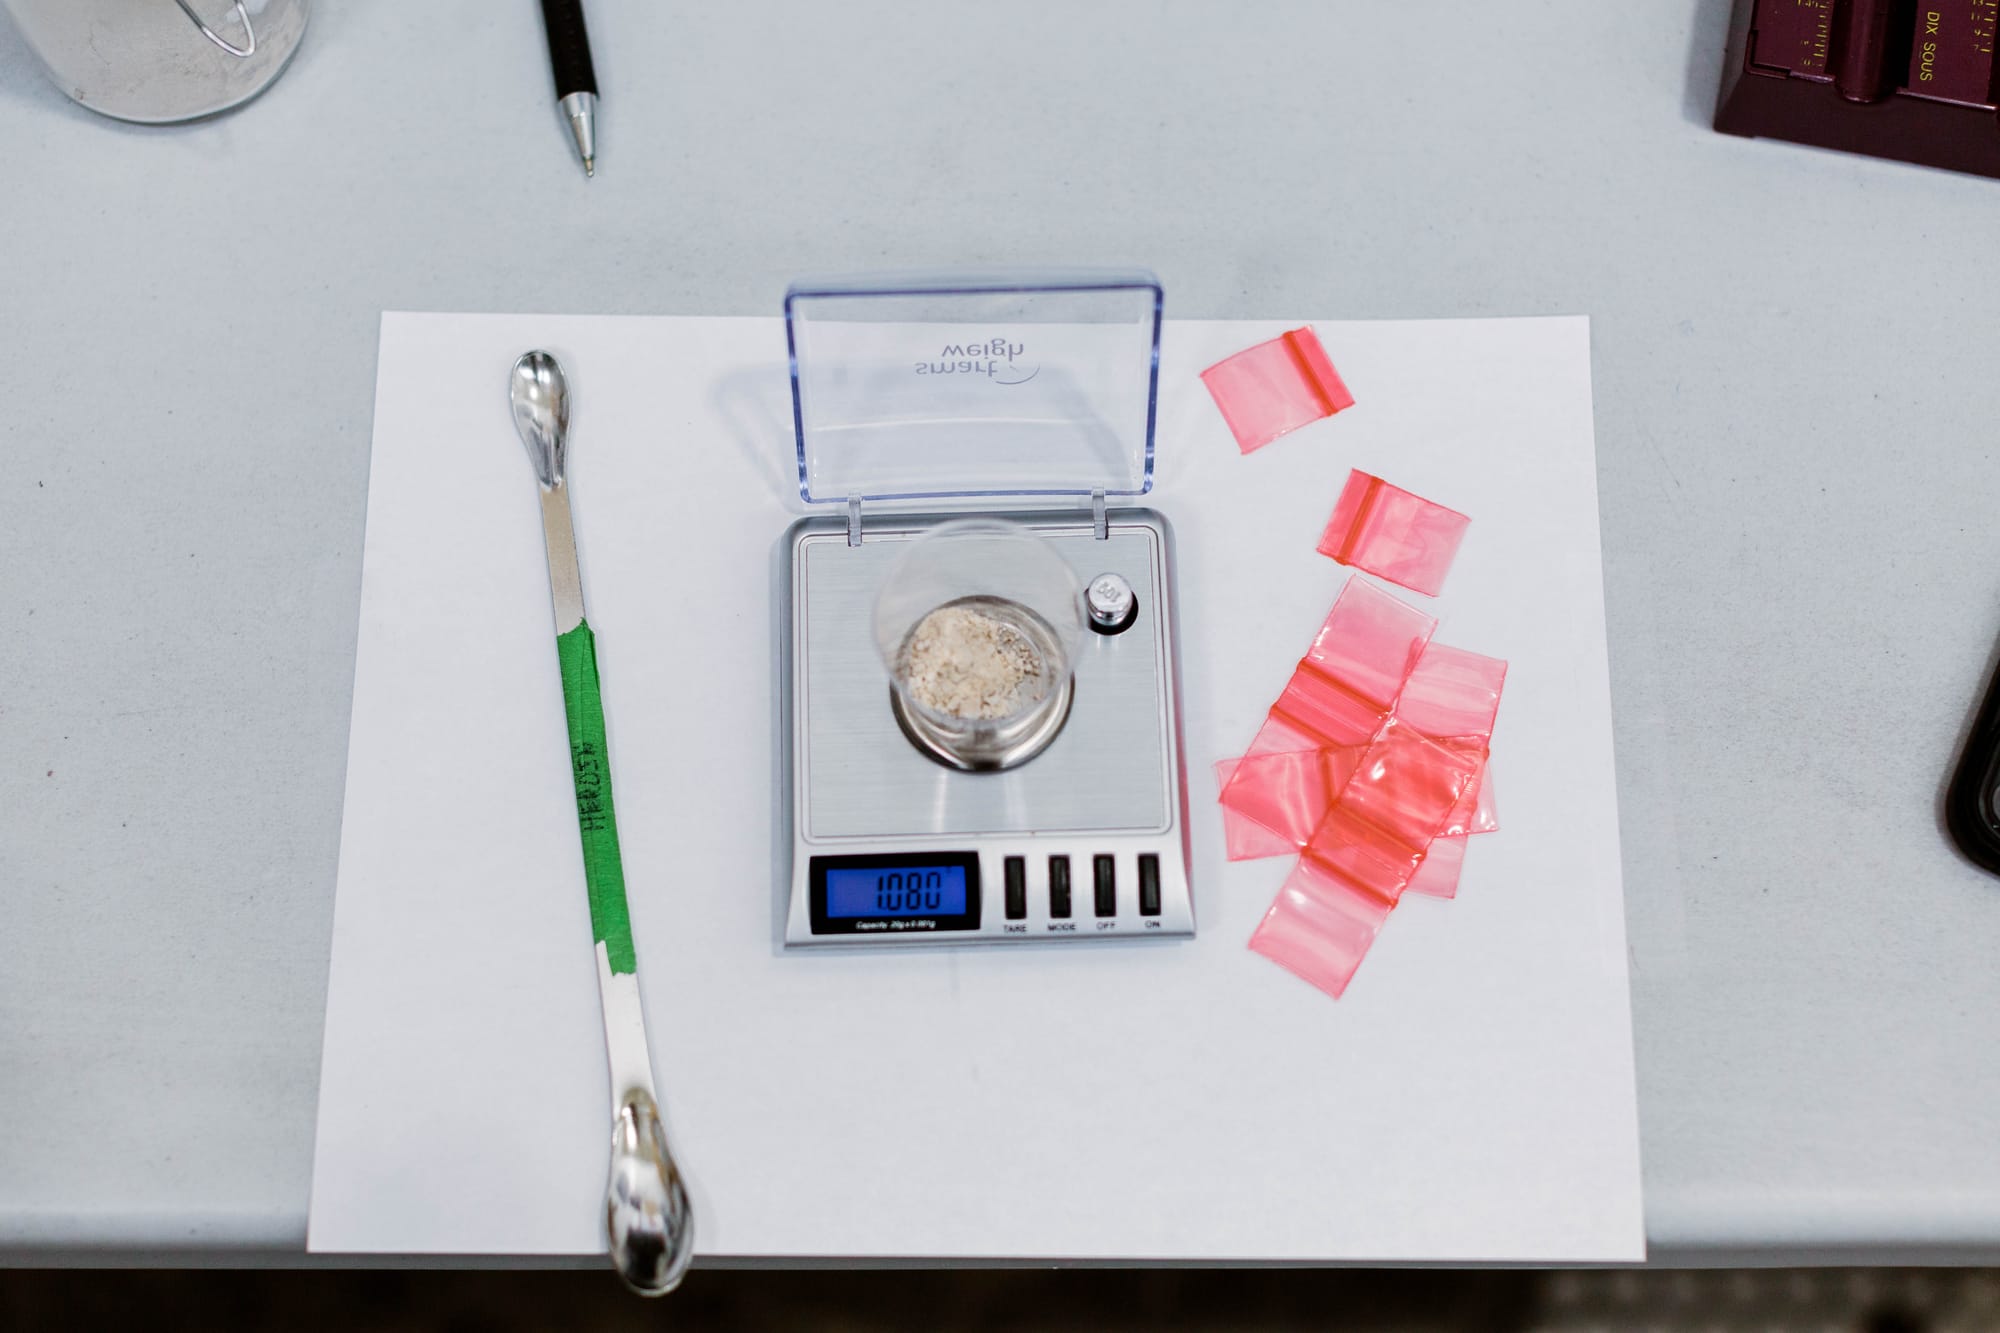 Aseptic scene of a scoopula (lab spoon) and weigh scale with red plastic ziploc bags beside it. A powder substance is in a cup on the scale.